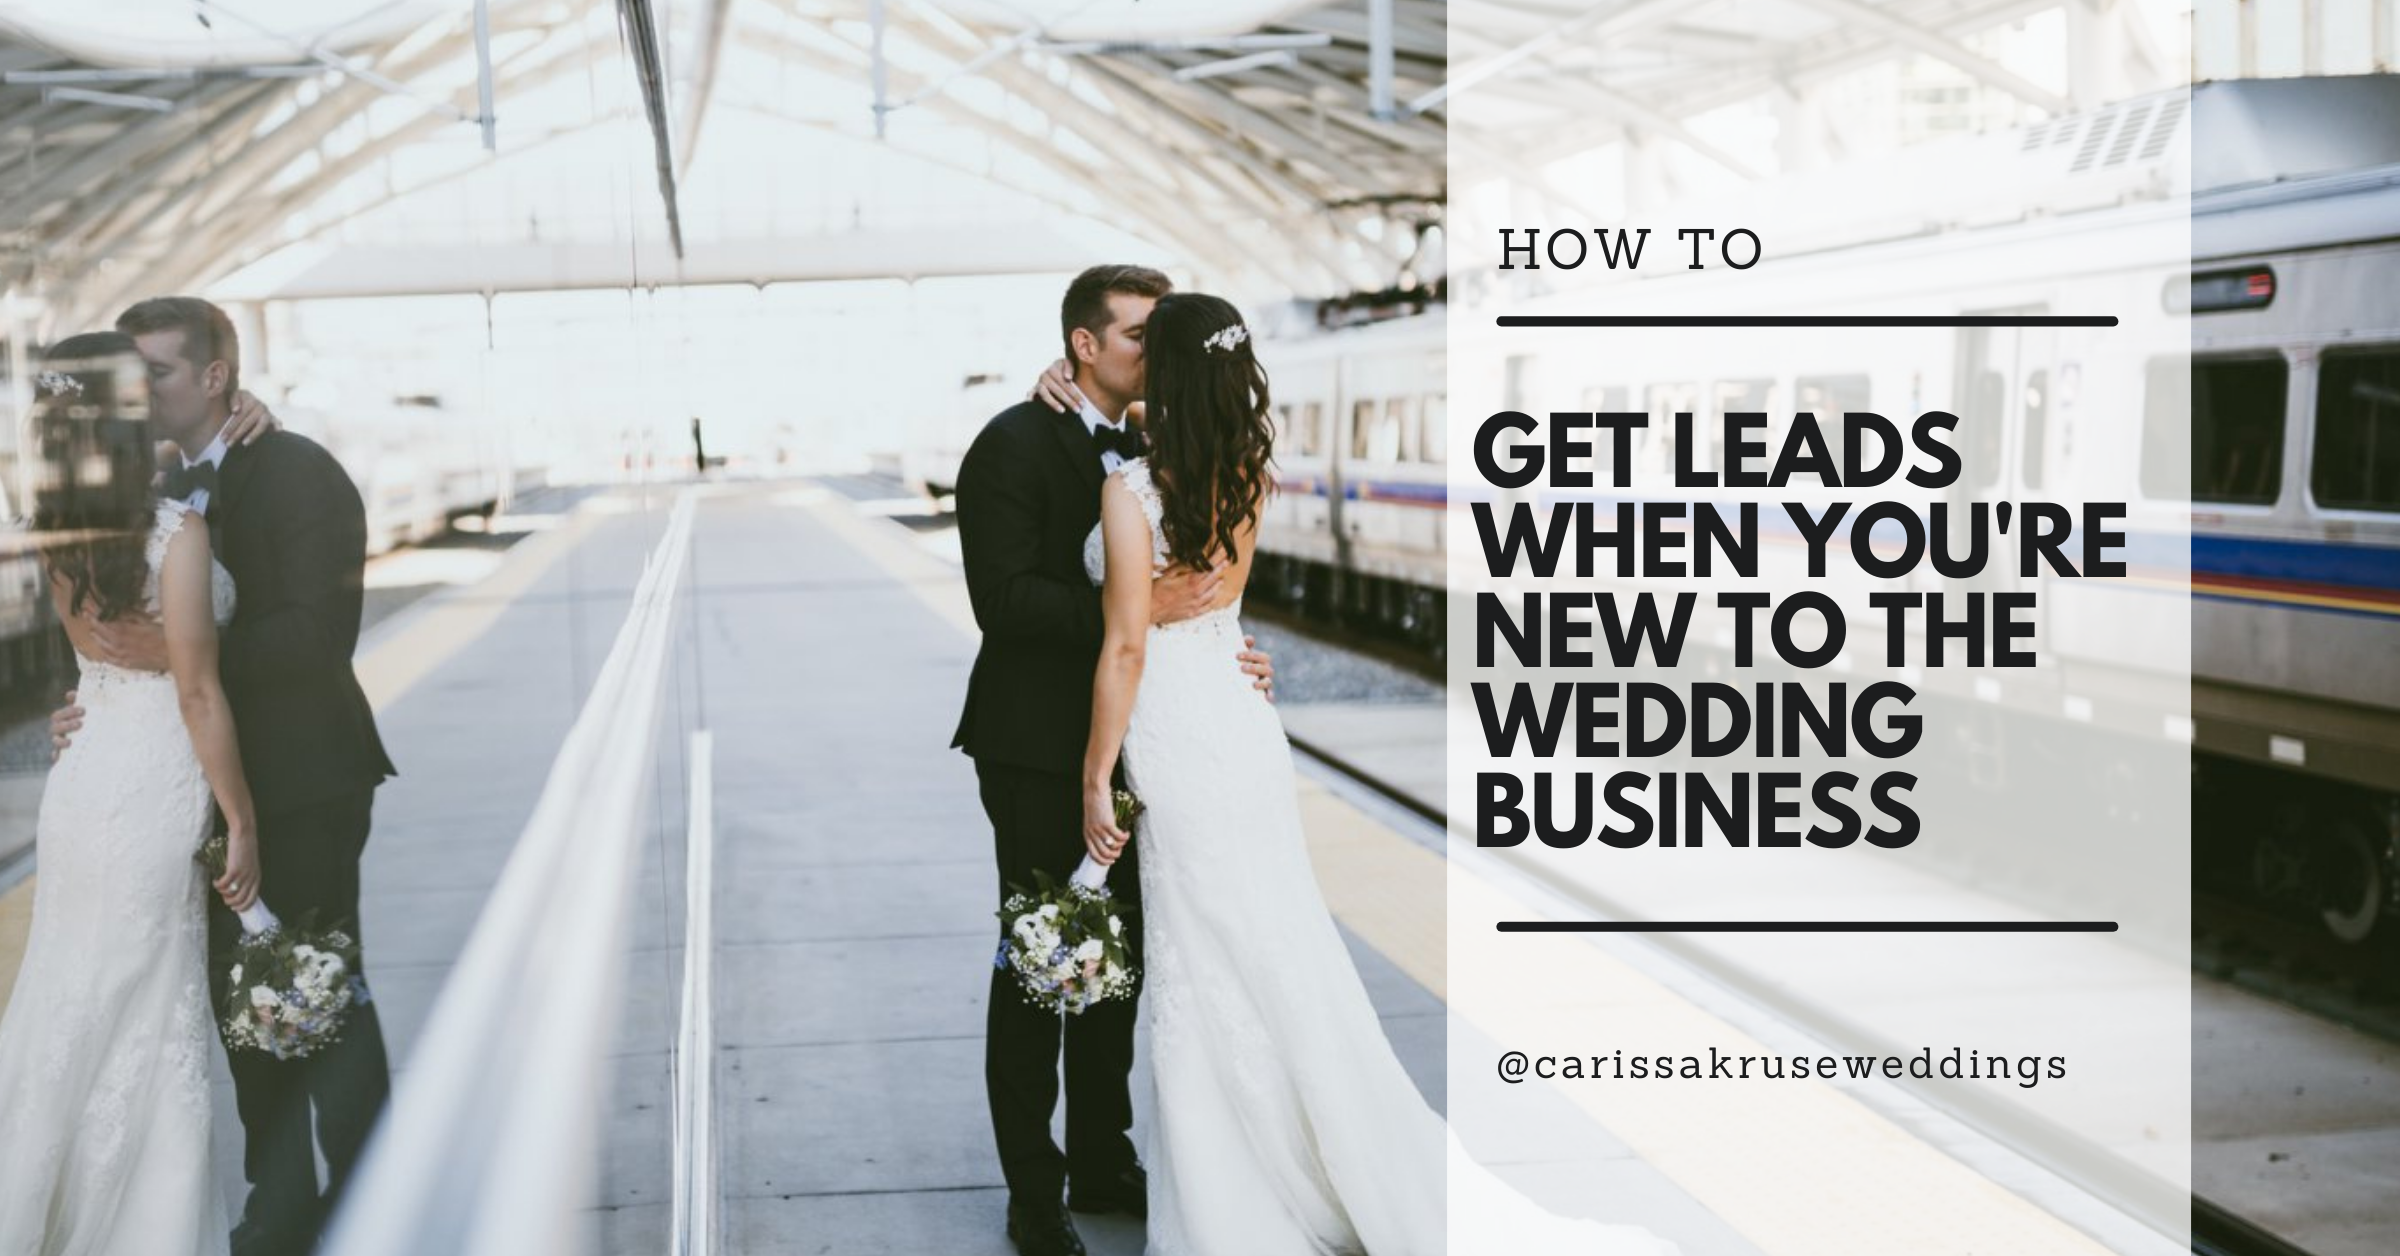 Get more wedding leads